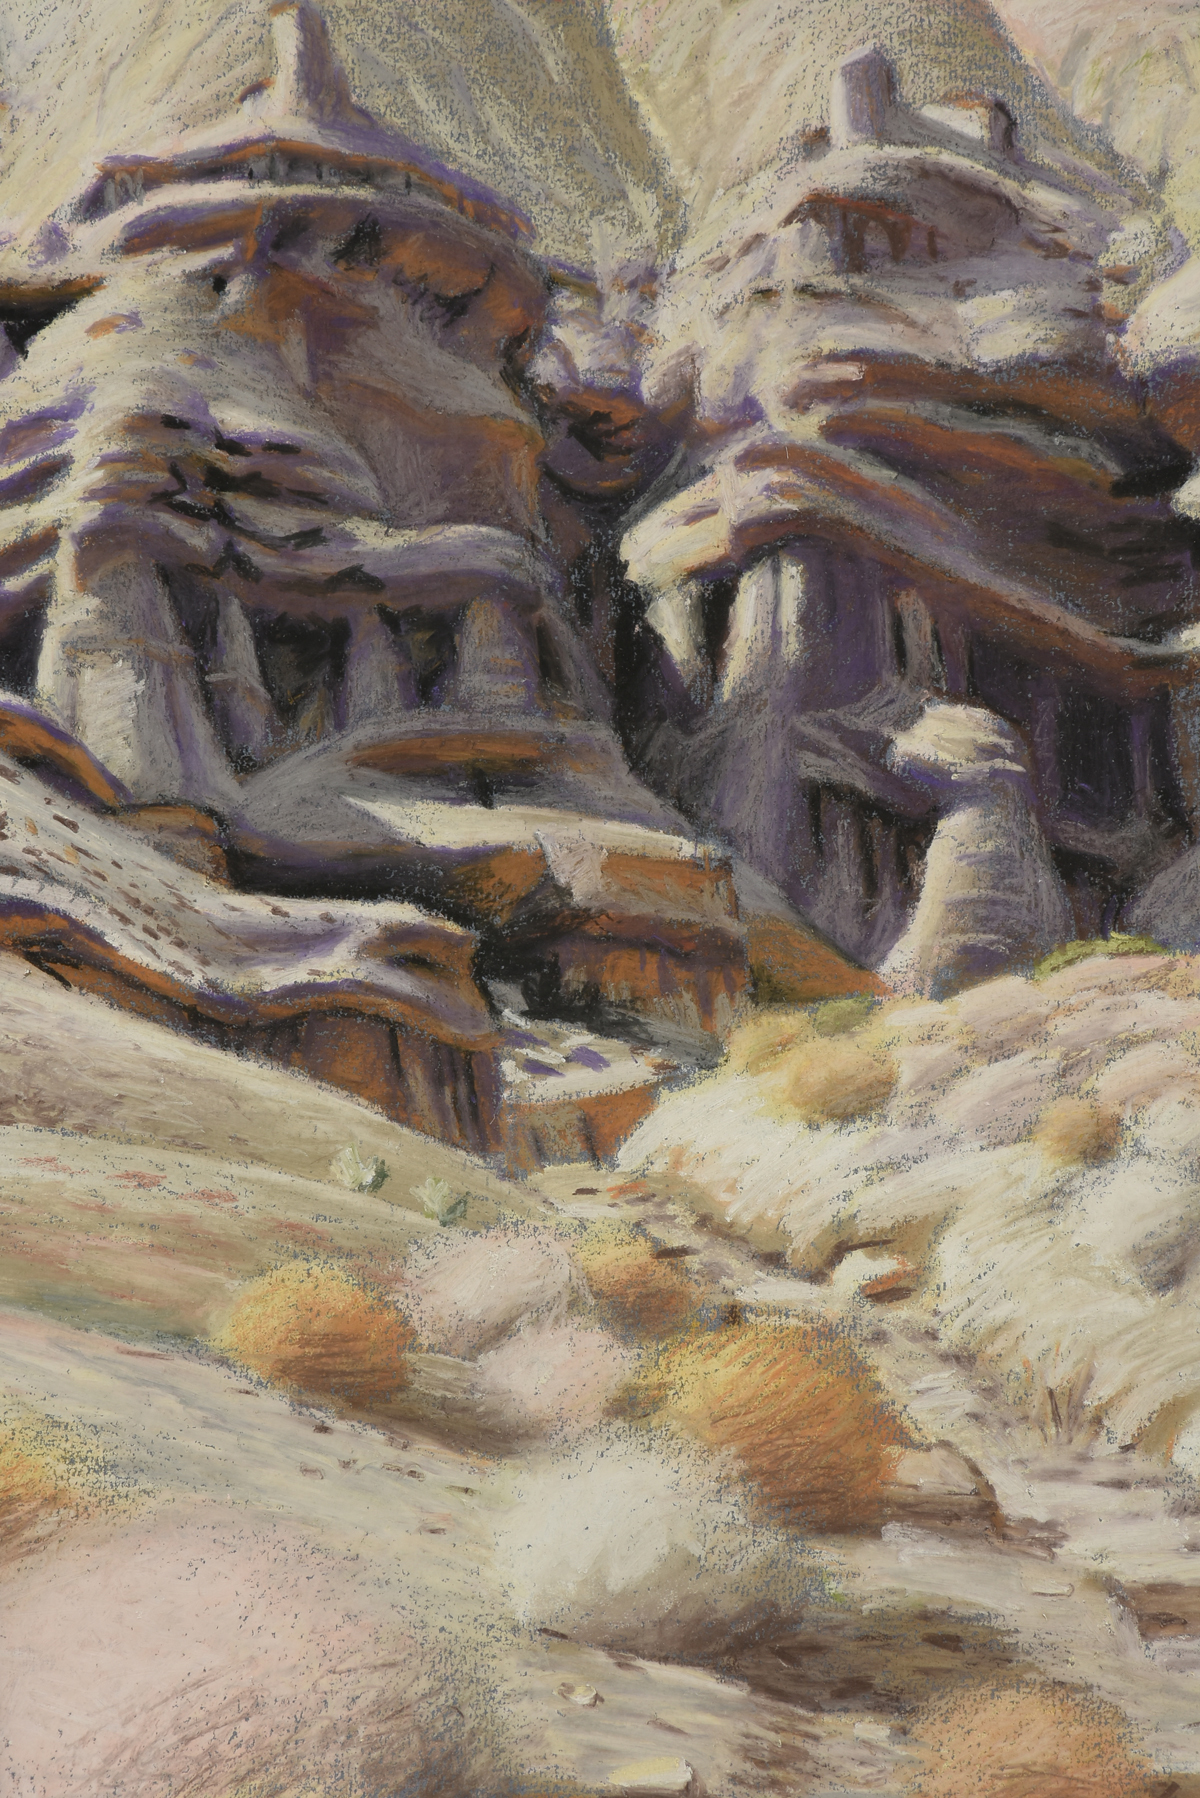 attributed to JAMES DOOLIN (American 1932-2002) A DRAWING, "Desert Dwellers," pastel on paper. 25" x - Image 6 of 11